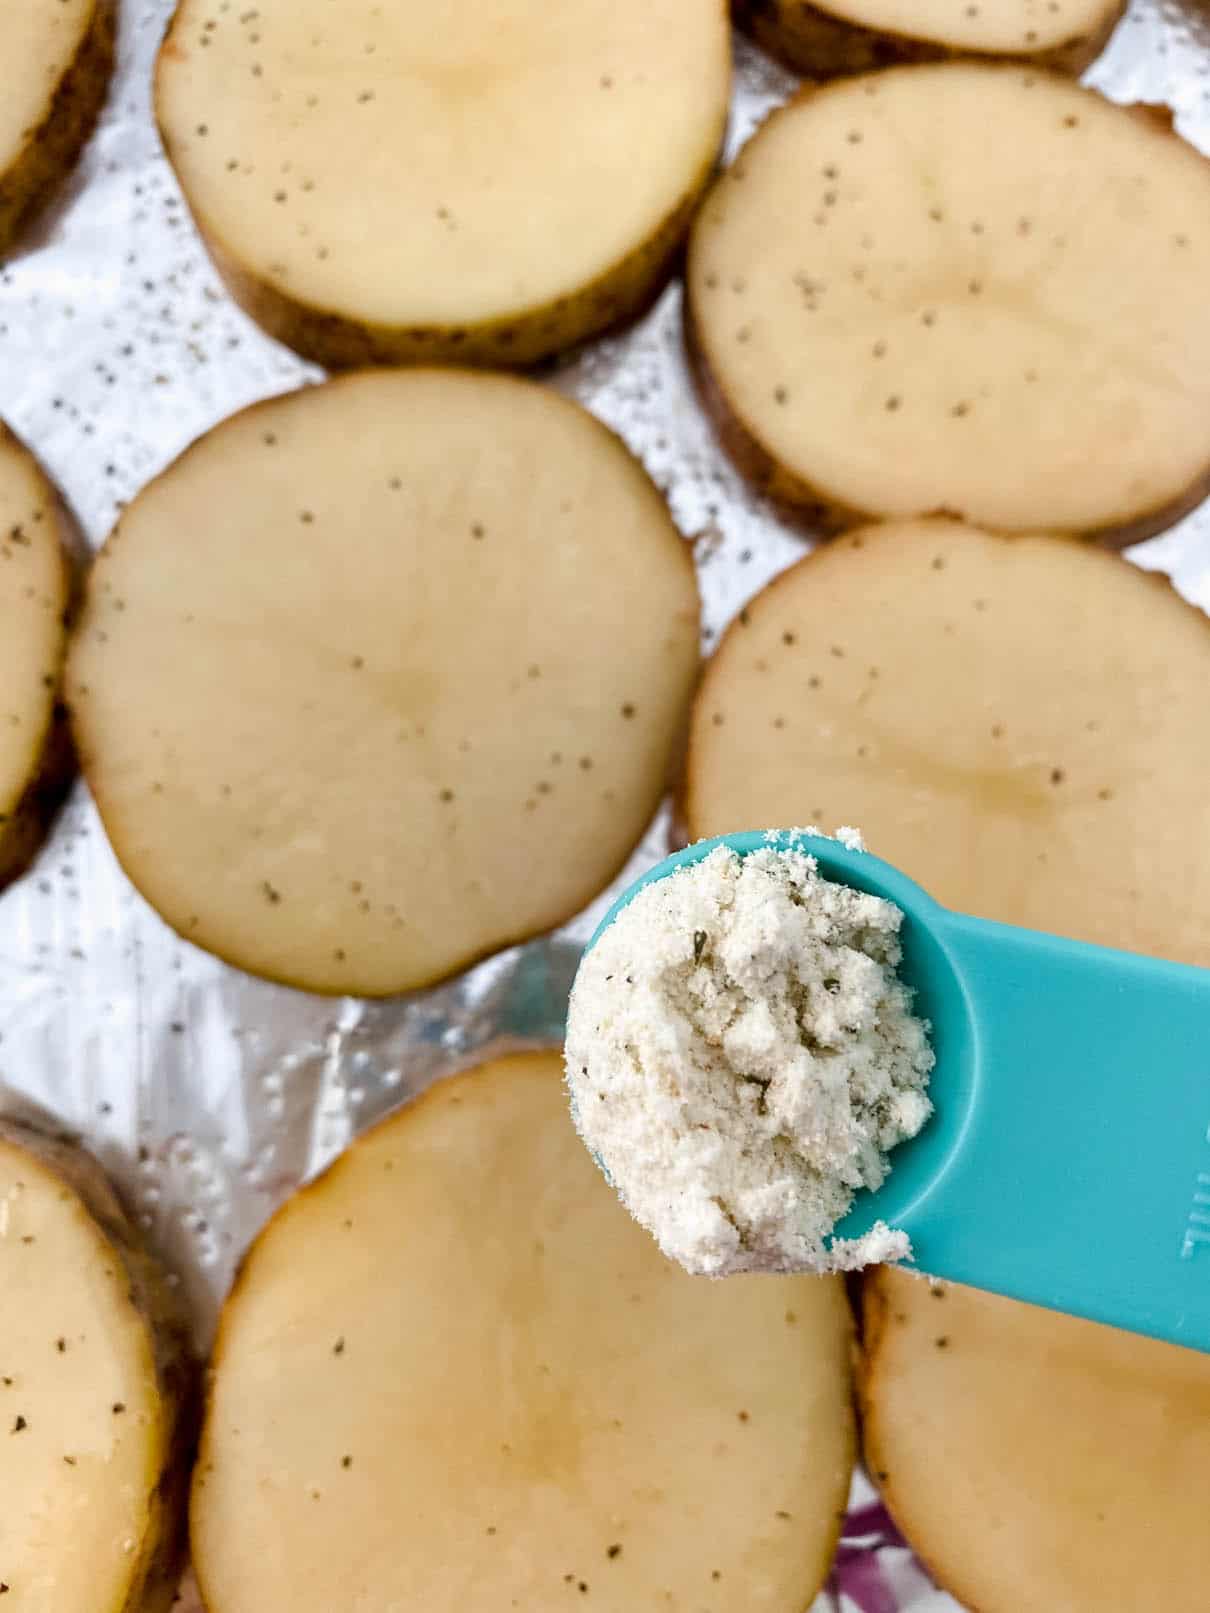 Garnishing sliced potatoes with ranch dressing